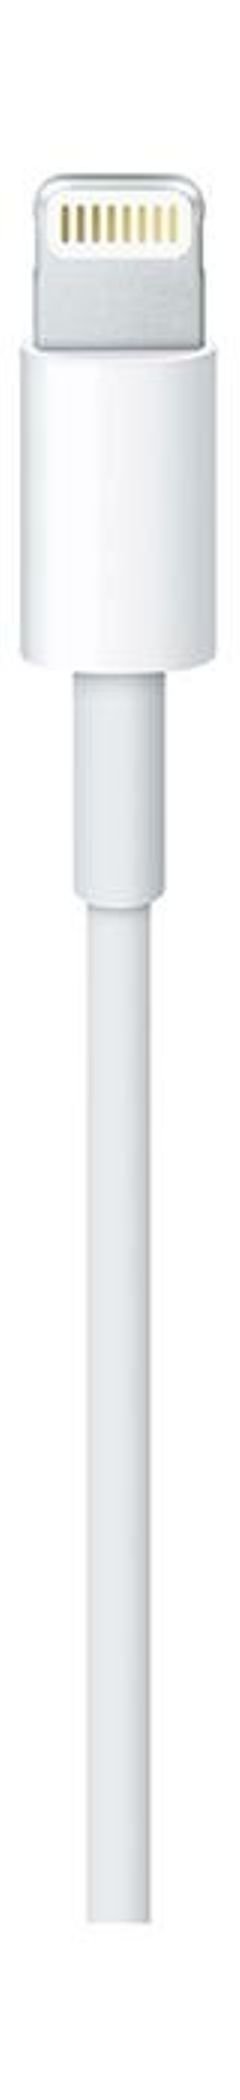 Apple USB Lightning Cable - 1m - White color - MD818ZM/A